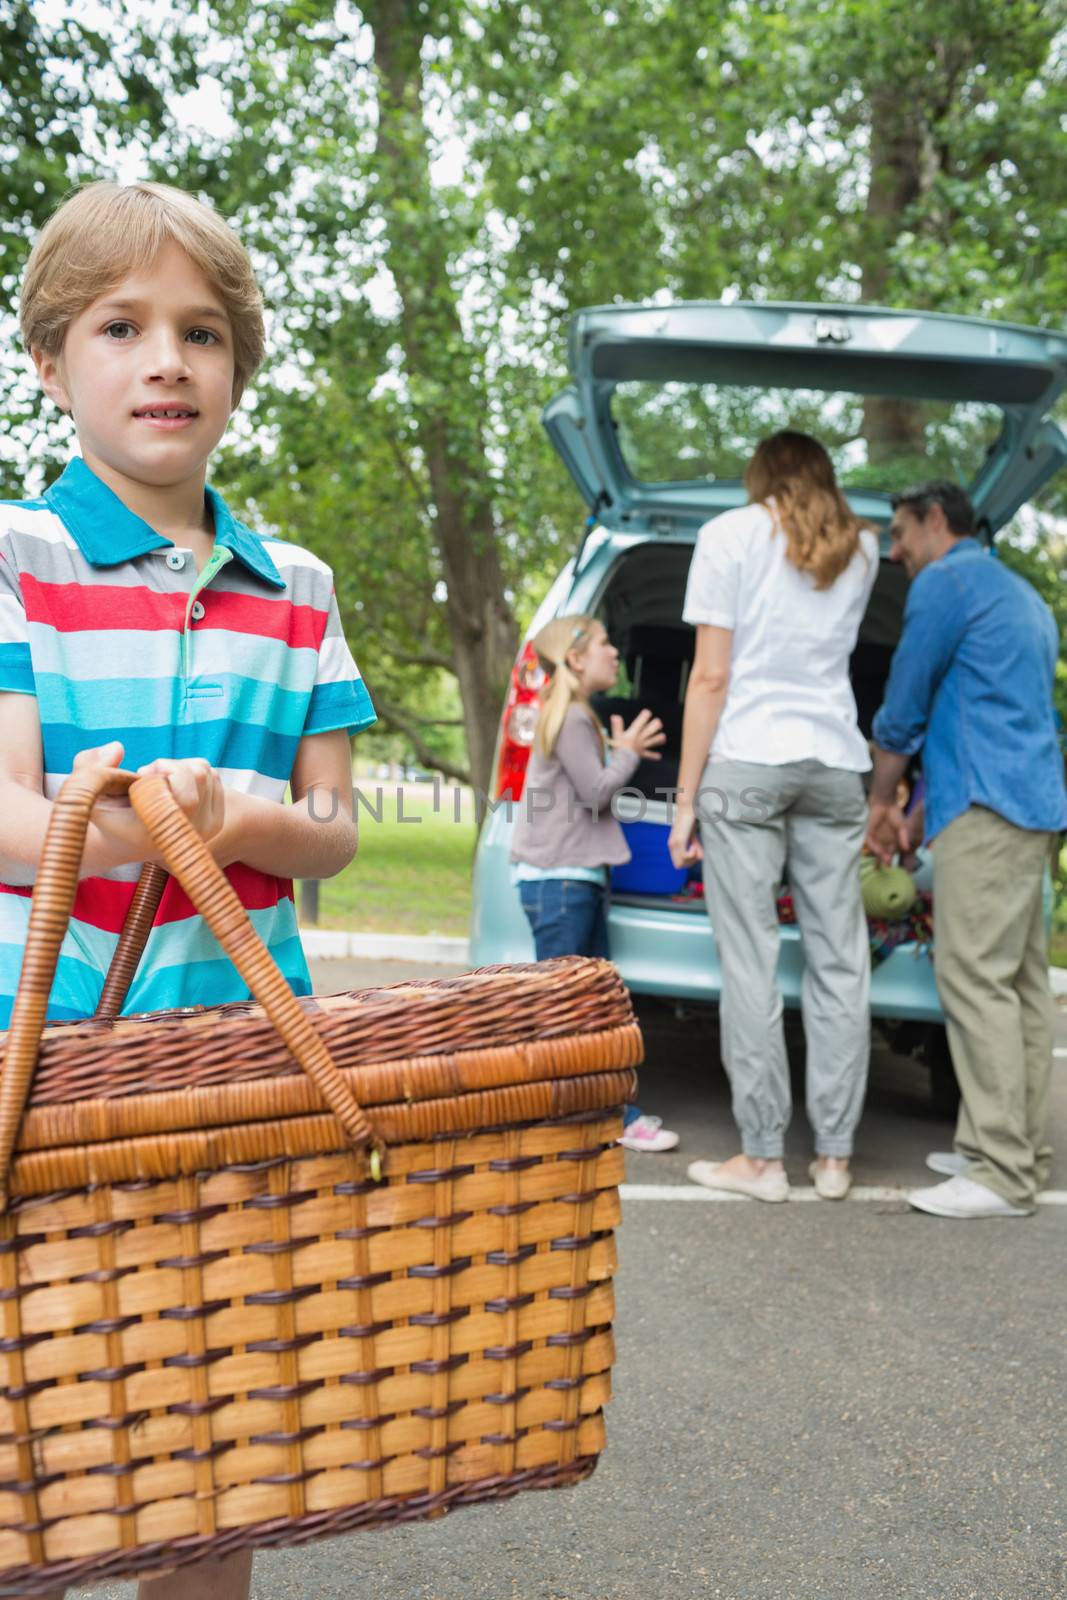 Boy with picnic basket while family in background at car trunk by Wavebreakmedia